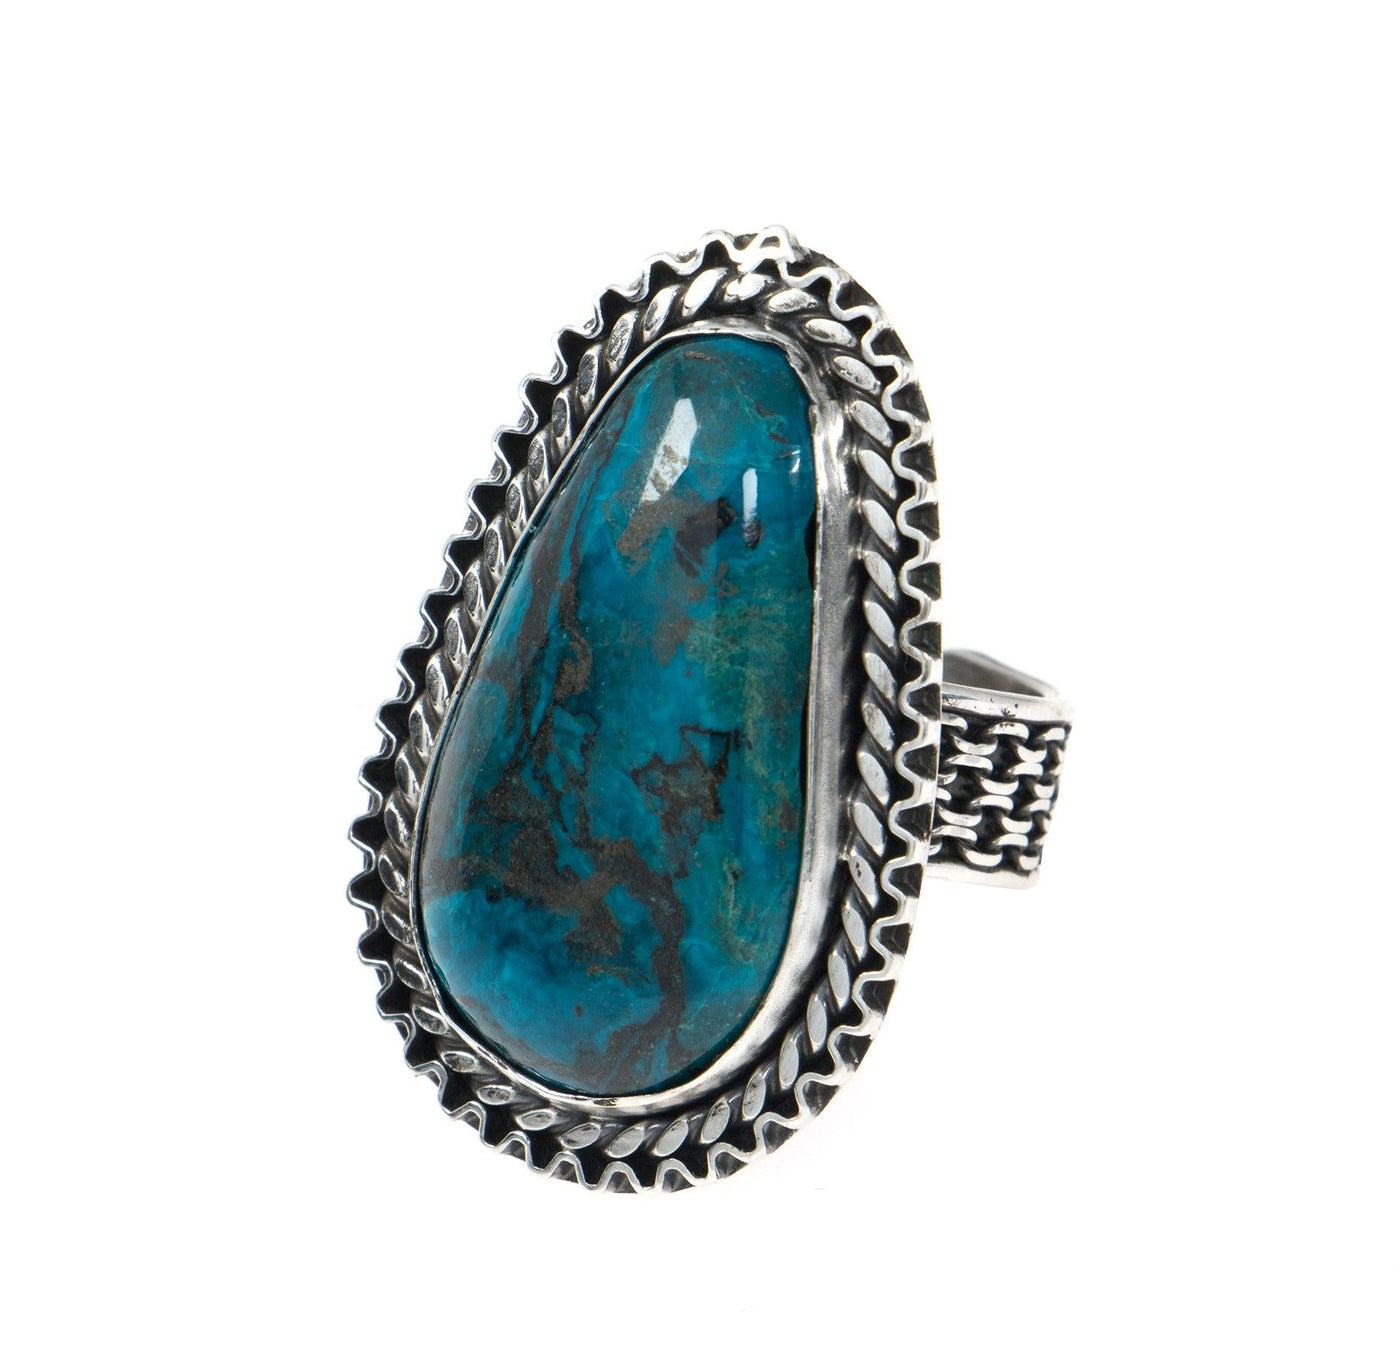 Eilat Stone Ring in 925 Sterling Silver #3 - Spring Nahal